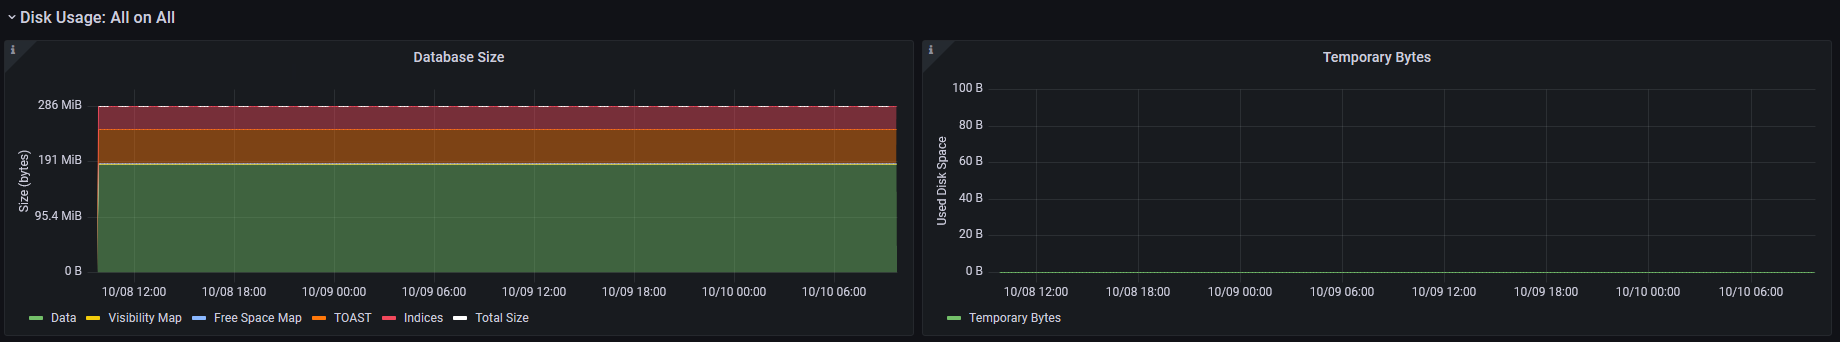 https://raw.githubusercontent.com/post-luxembourg/pgflux/v1.0.1/docs/_images/grafana-dashboard-02.png